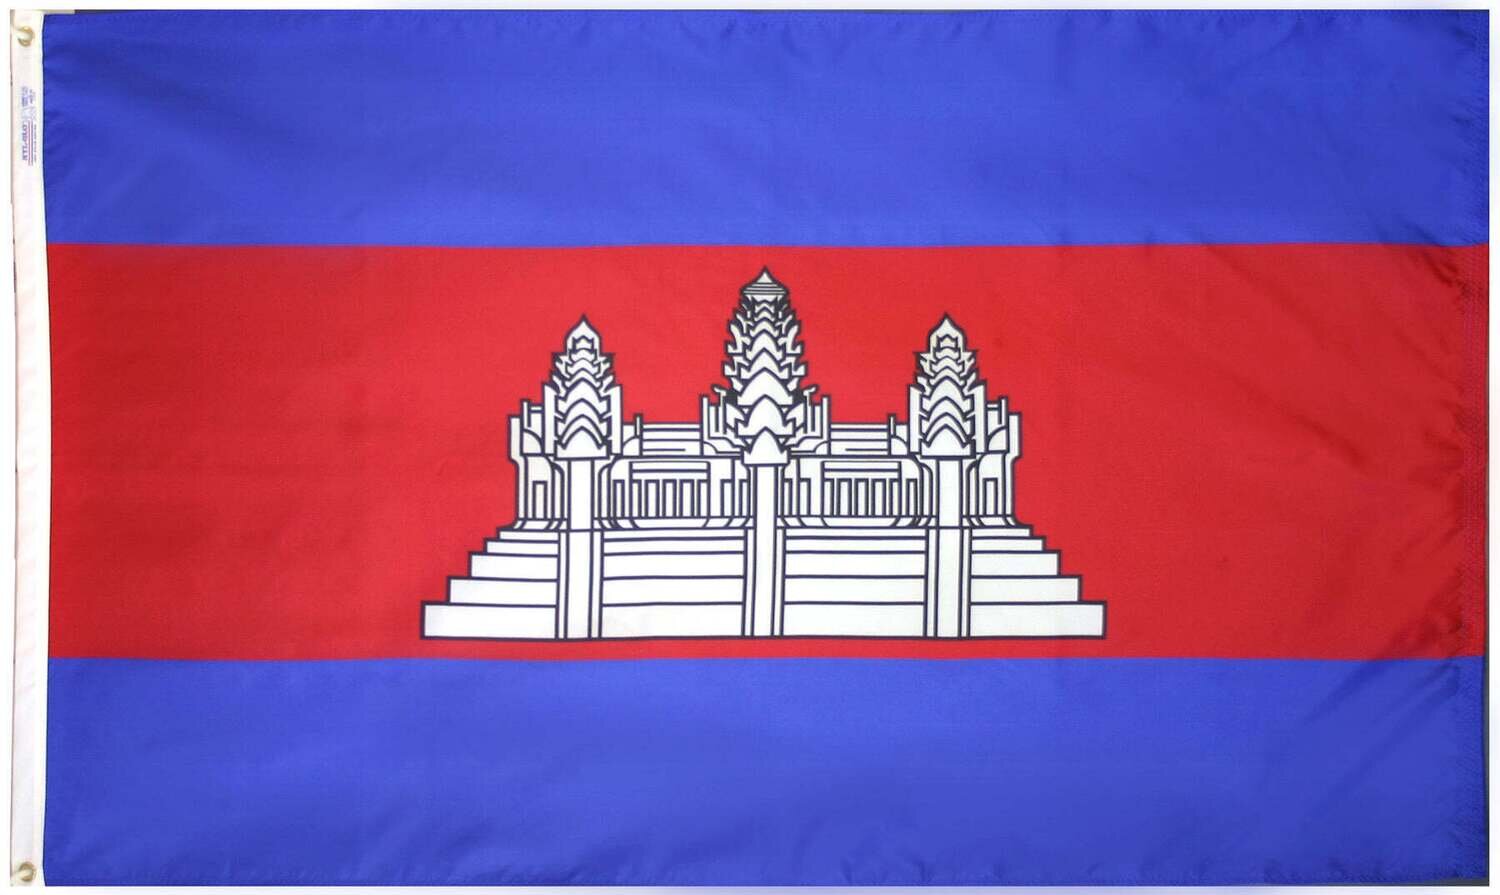 Cambodia Flag 3x5 ft. Nylon SolarGuard Nyl-Glo 100% Made in USA to Official United Nations Design Specifications.